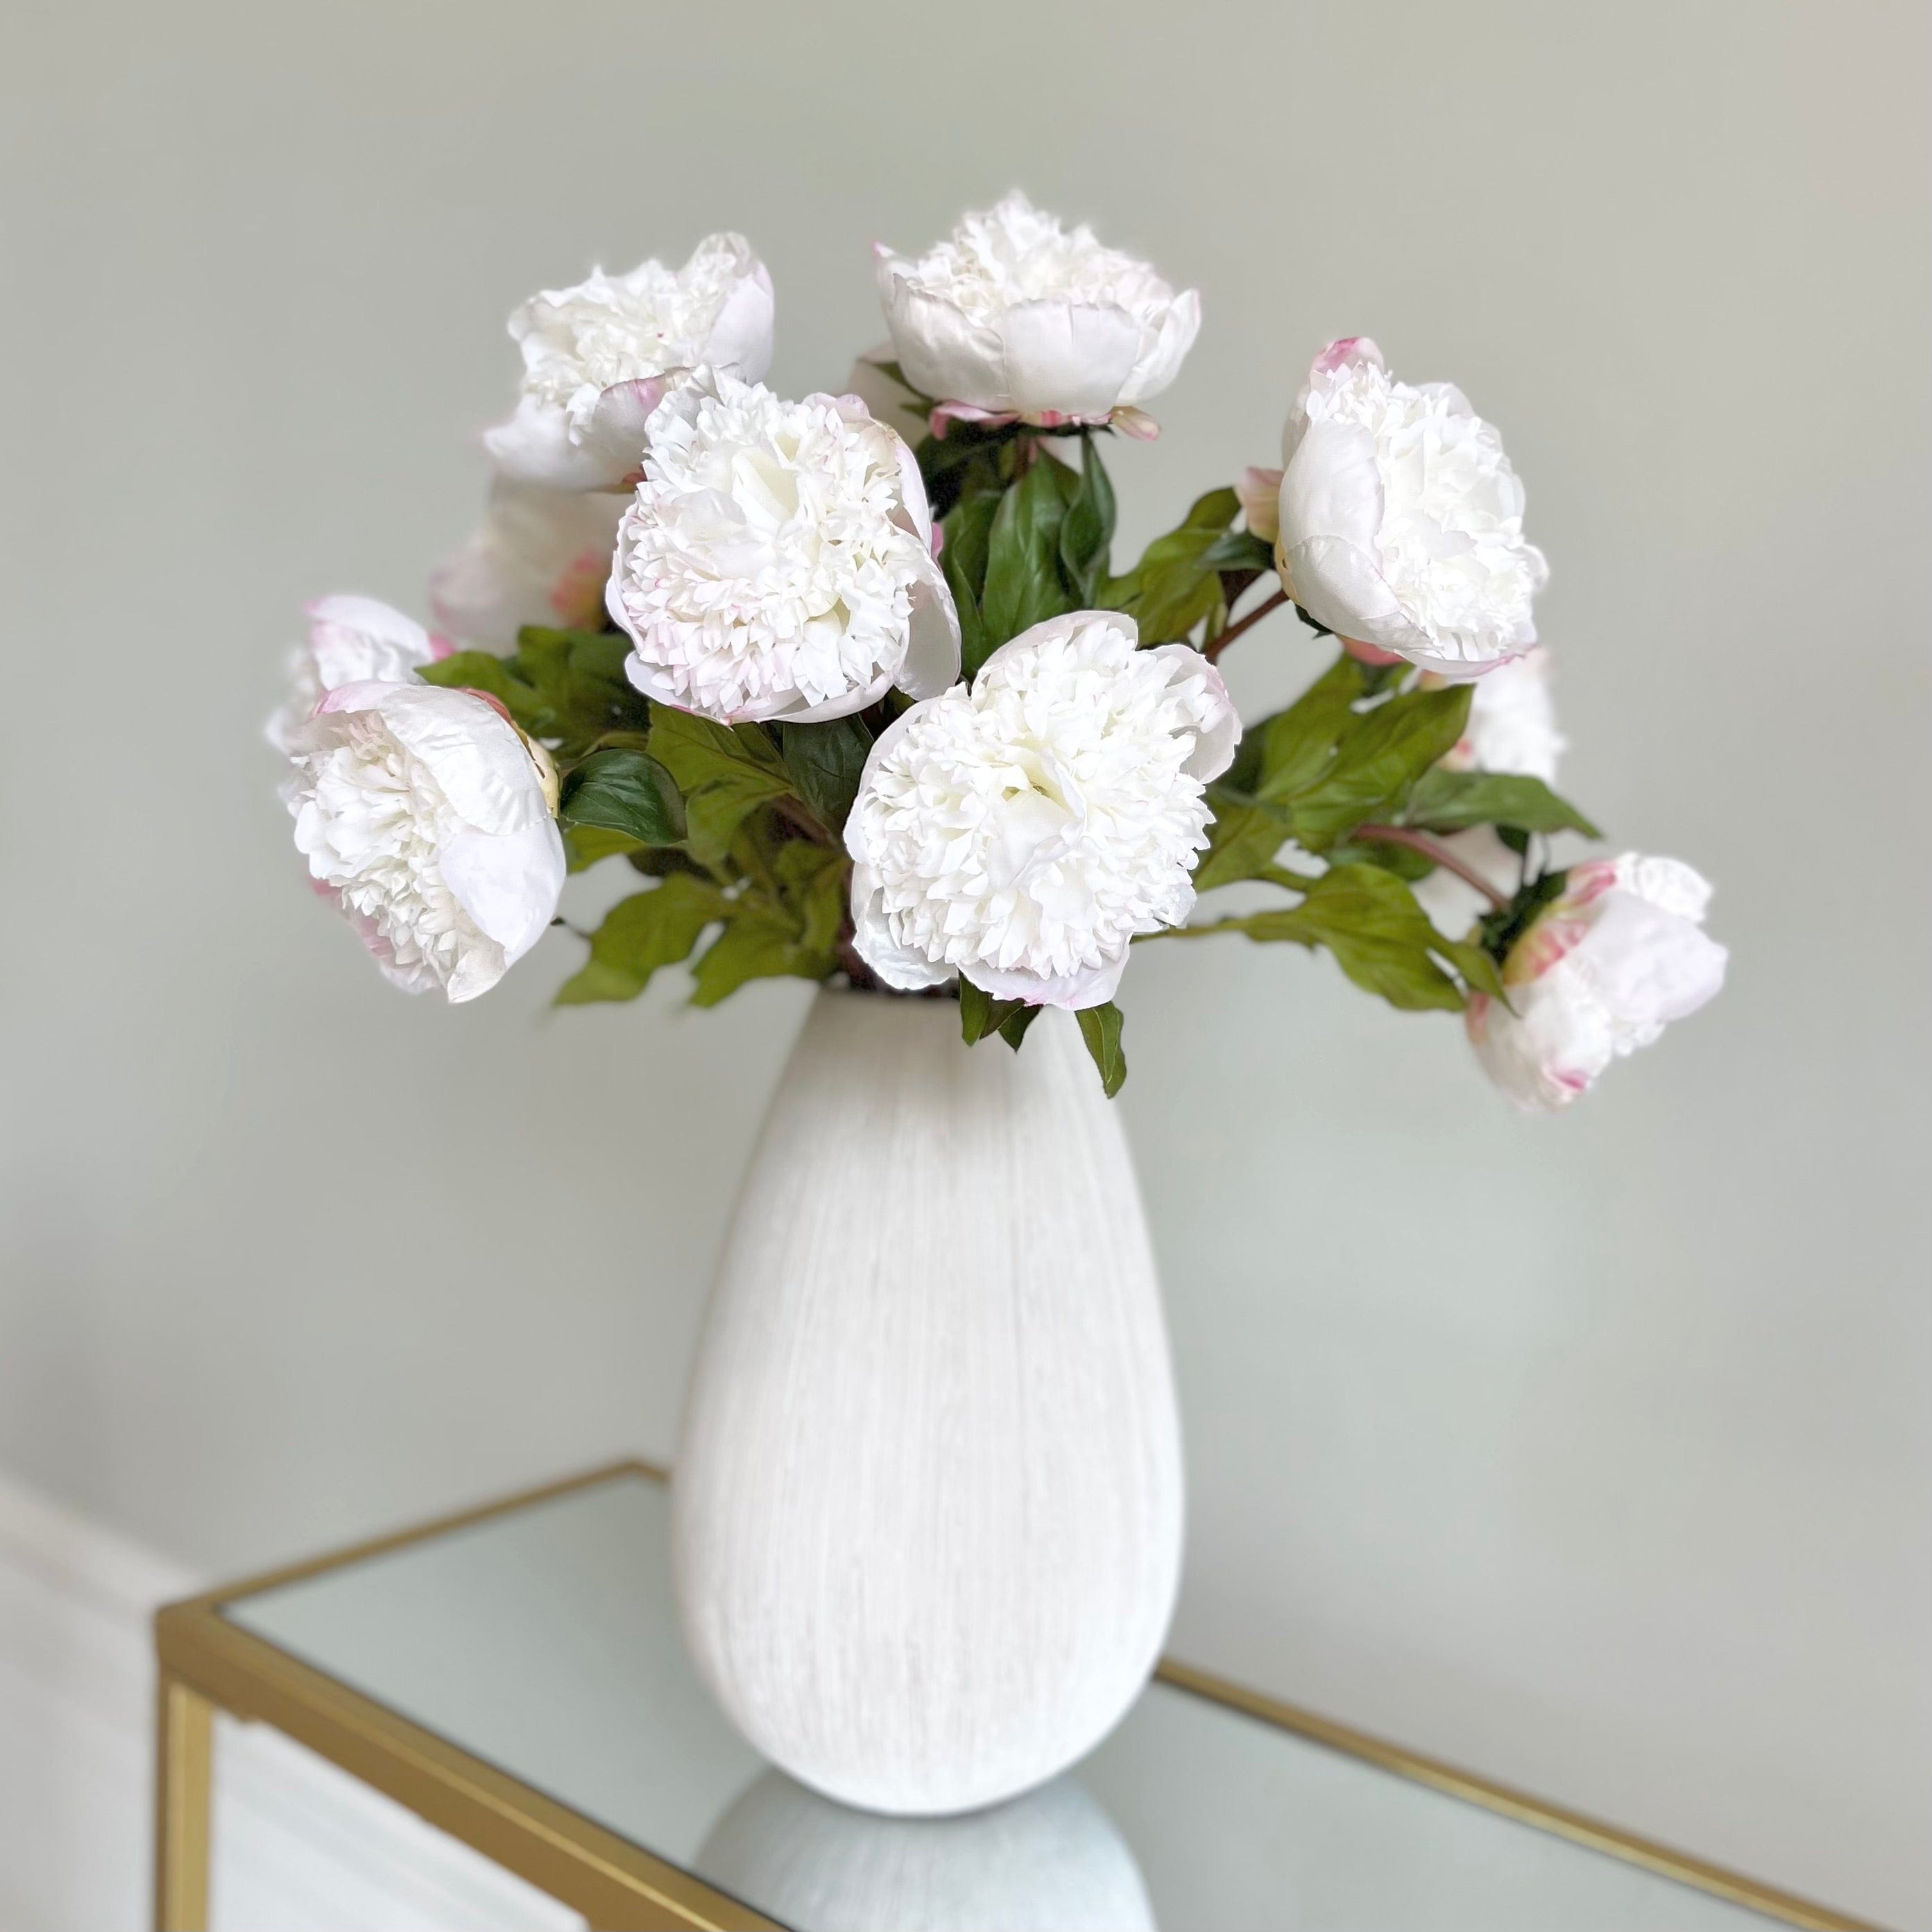 Artificial flowers luxury faux silk small white peony bibury vase lifelike realistic faux flowers ABP1513 ABY4236WH